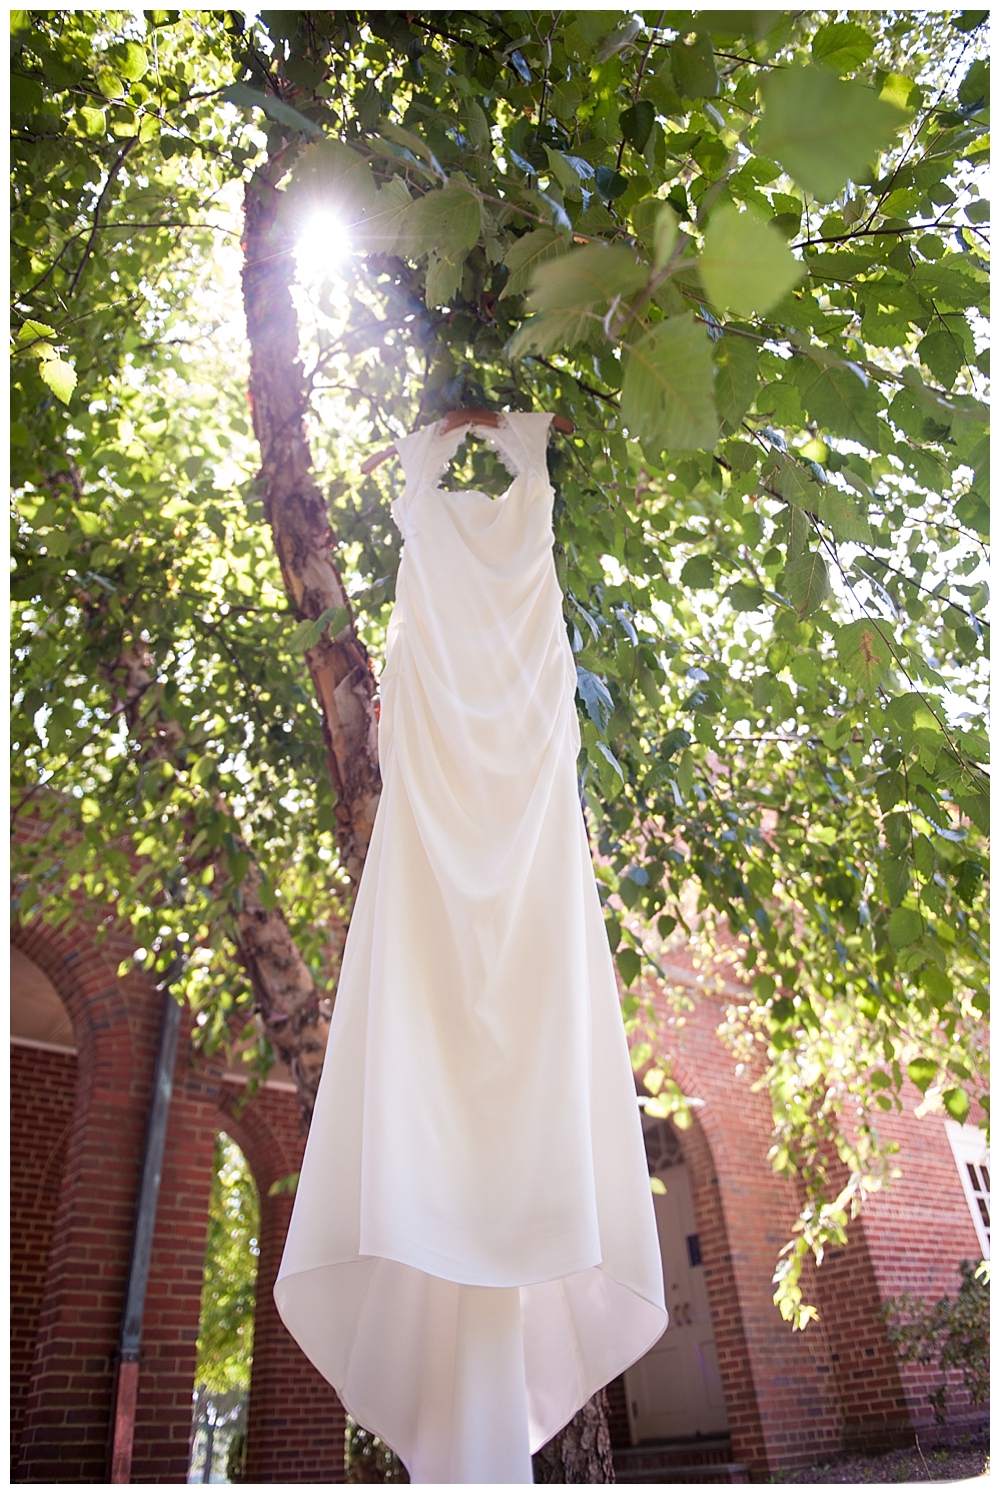 wedding gown backlit hanging in tree